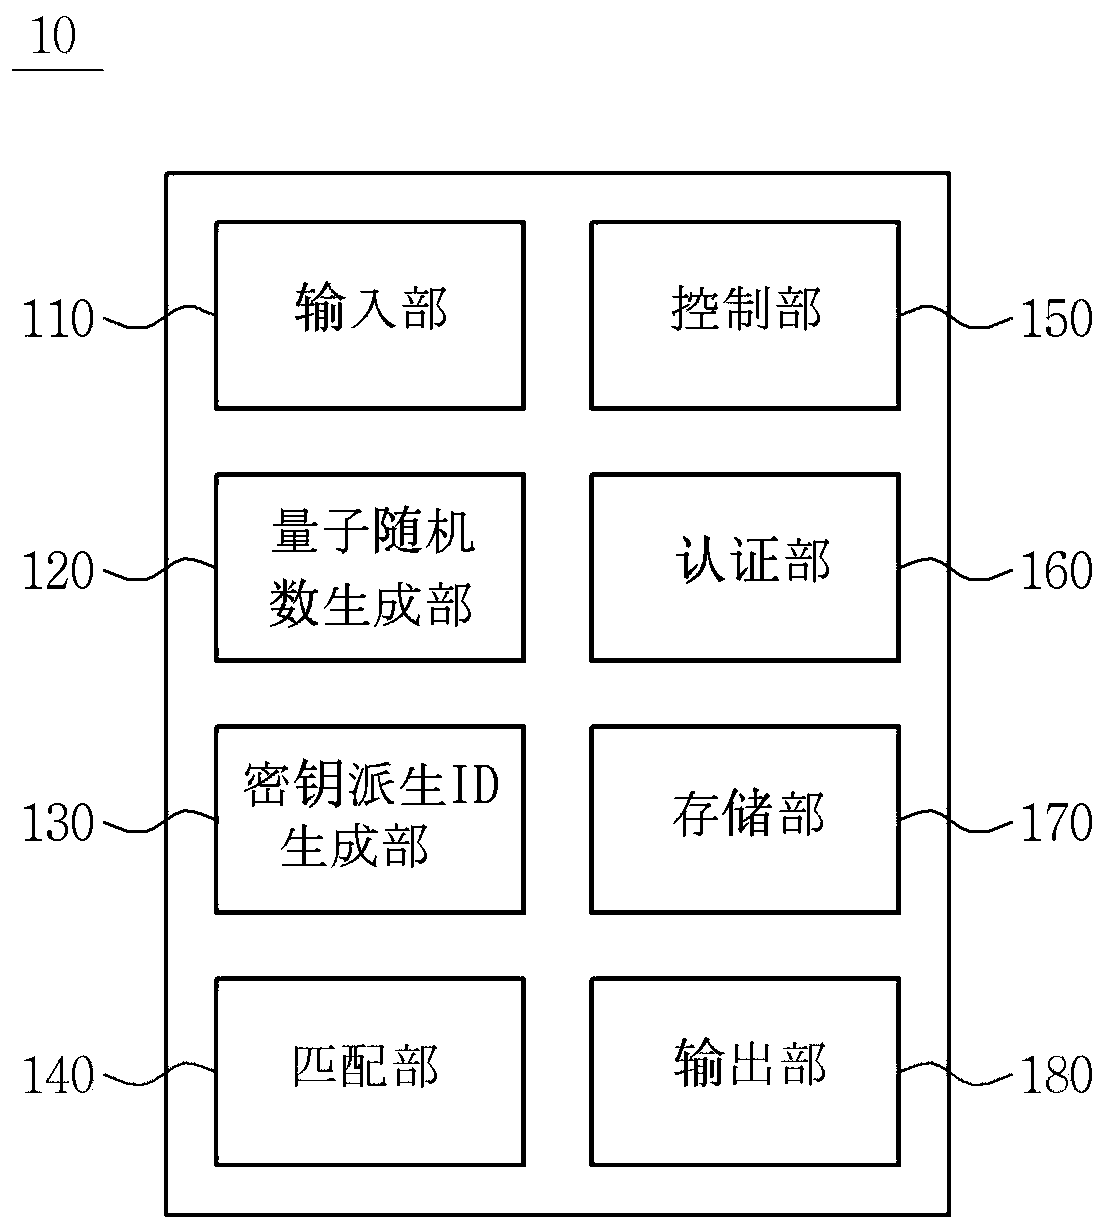 System for preventing smudge and shoulder surfing attacks on mobile device and user pattern authentication method